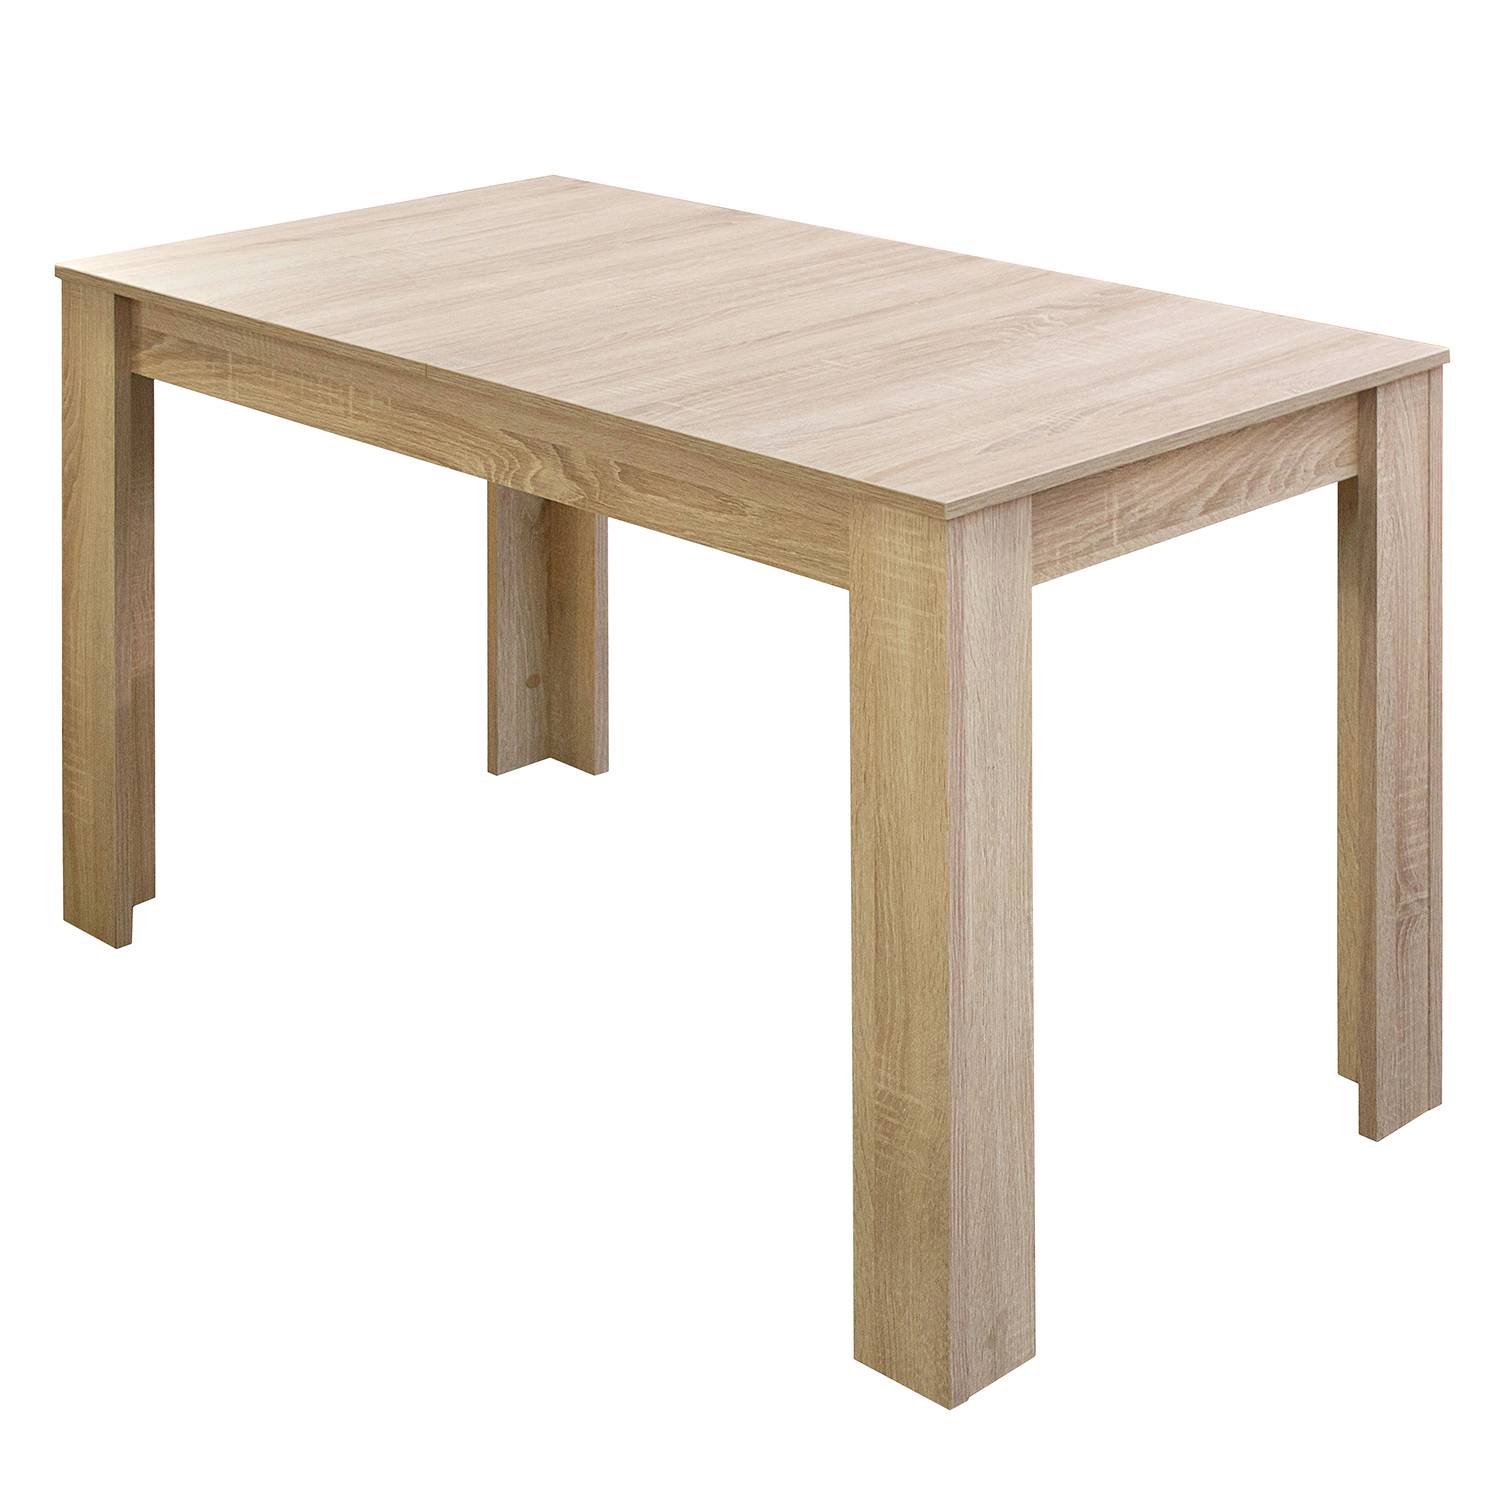 Image of Table extensible Fairford 000000001000121346